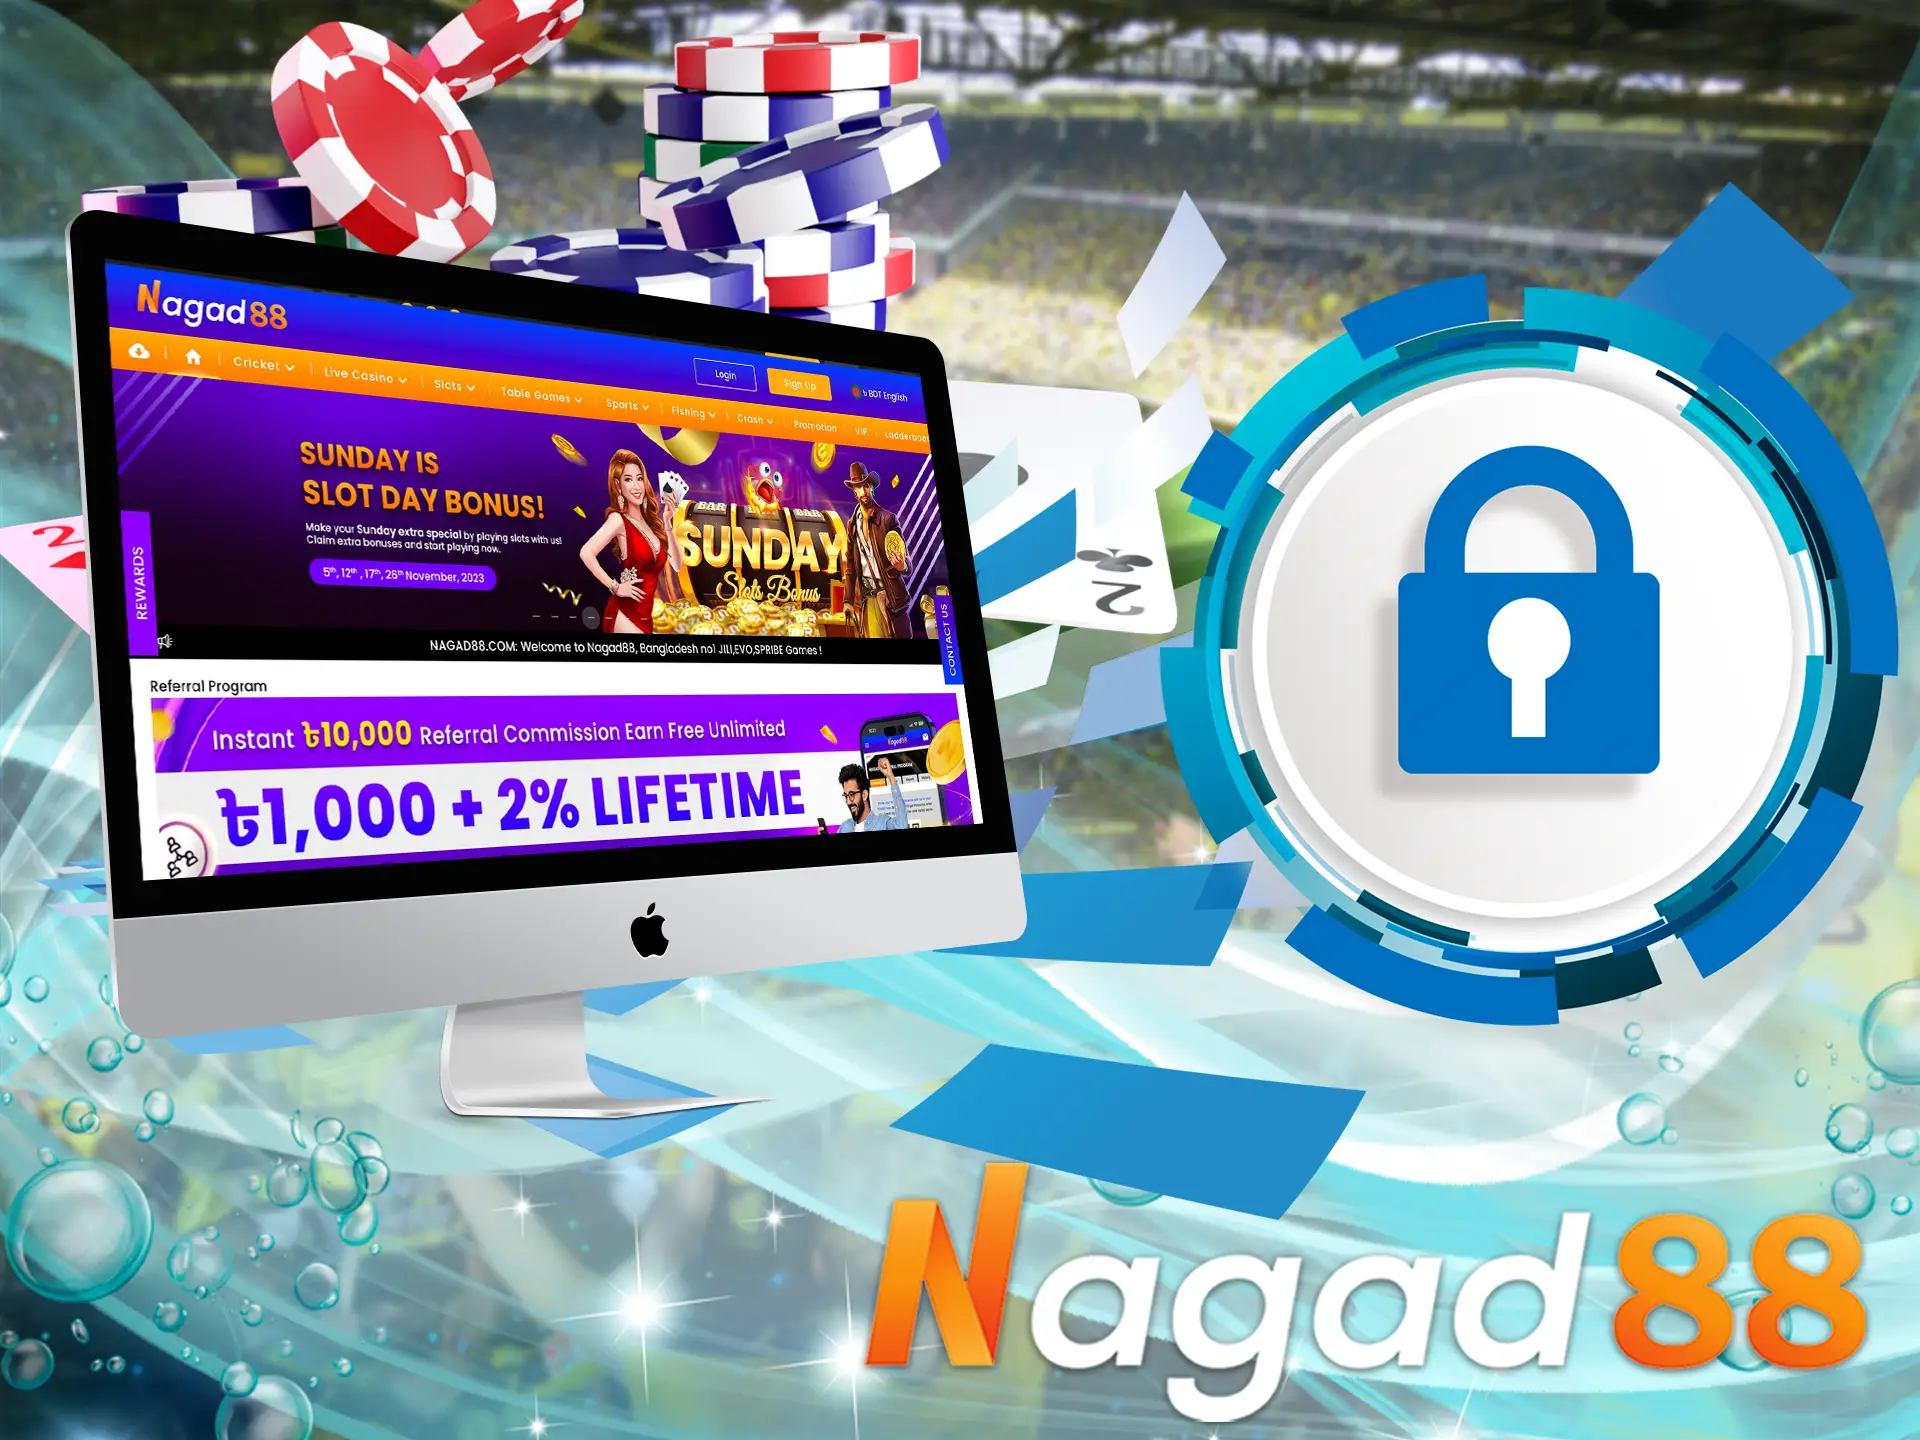 Nagad88 strictly ensures the security of your personal data and provides modern information security methods.